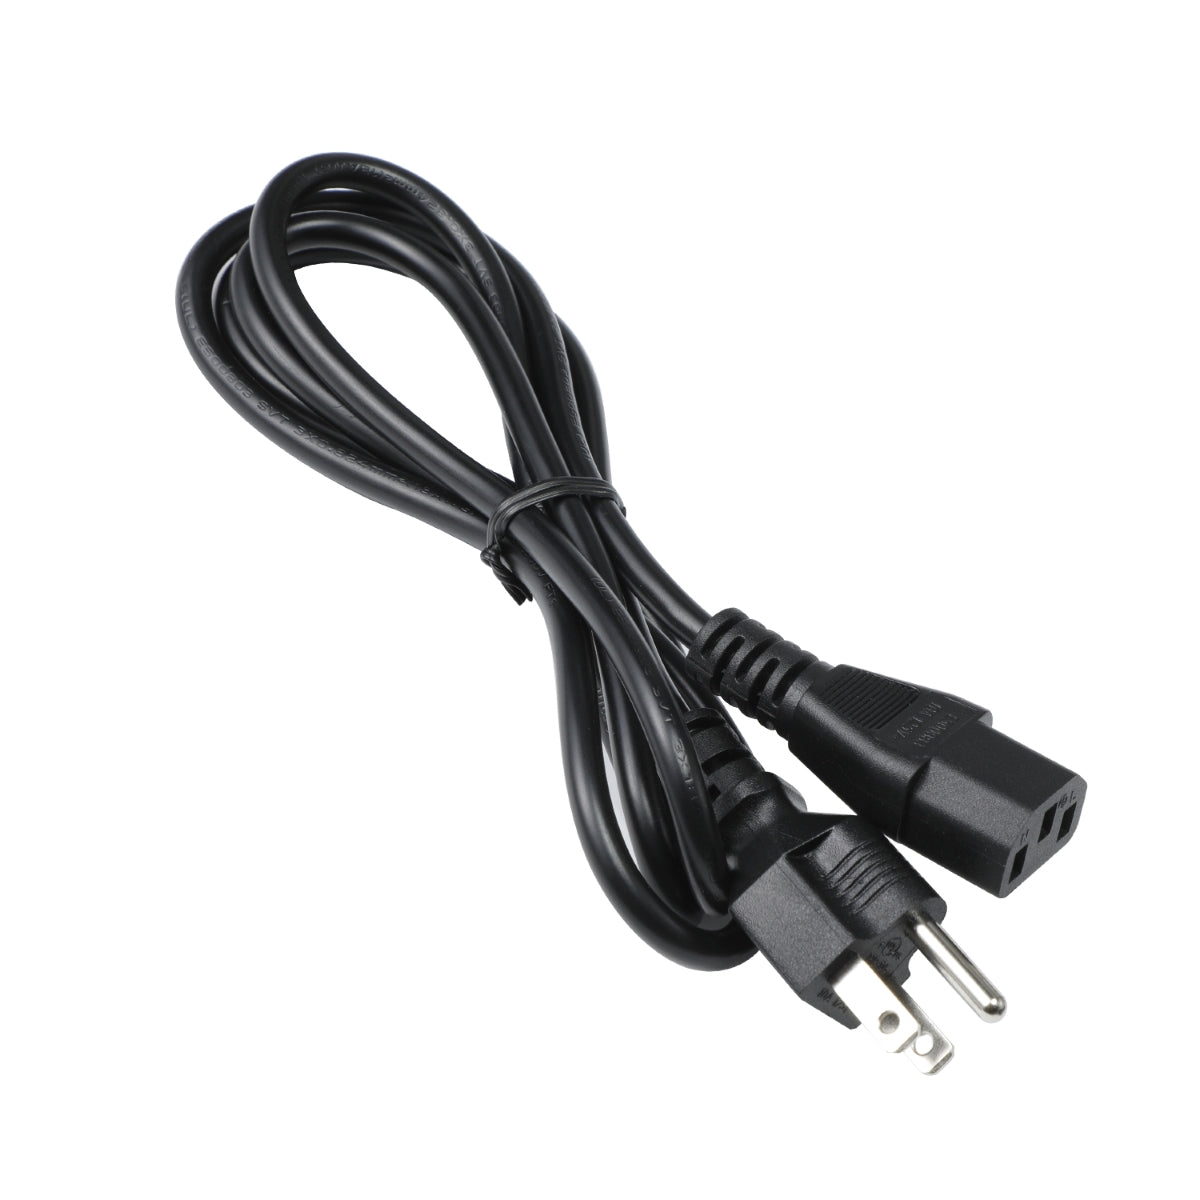 Power Cable for Philips 271B8QJEB Monitor.